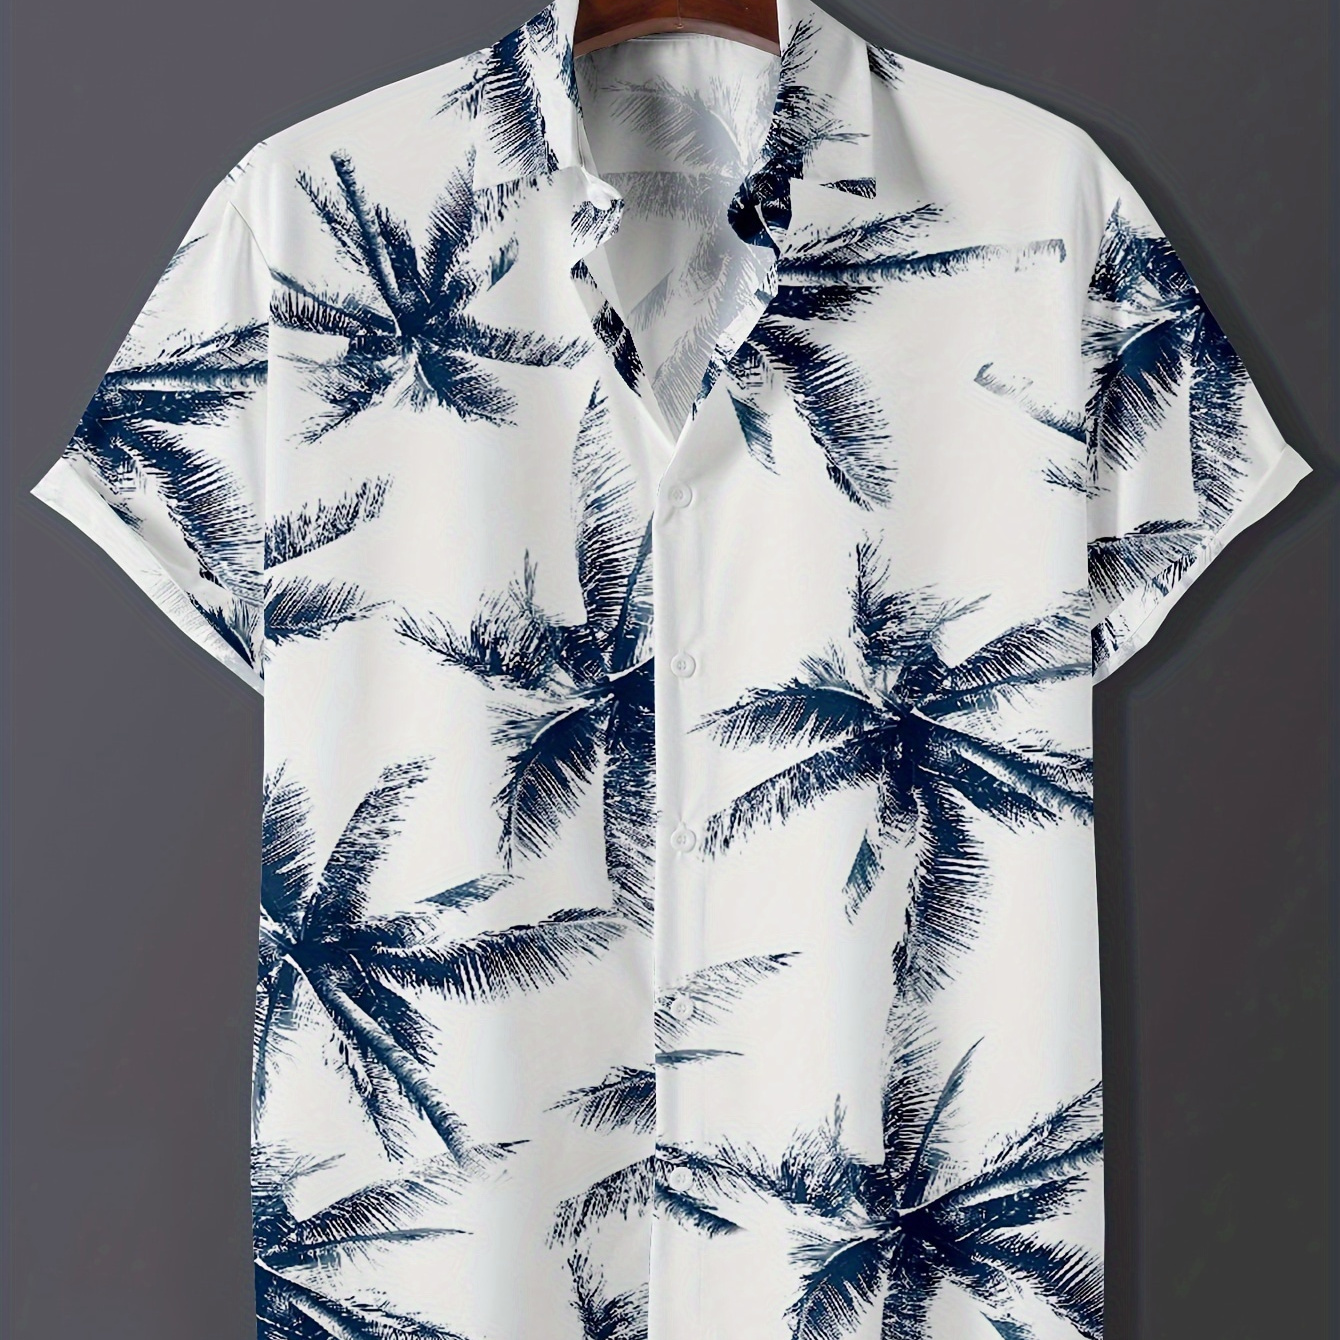 

Men's Coconut Trees Graphic Print Shirt, Casual Lapel Button Up Short Sleeve Shirt For Summer Outdoor Activities